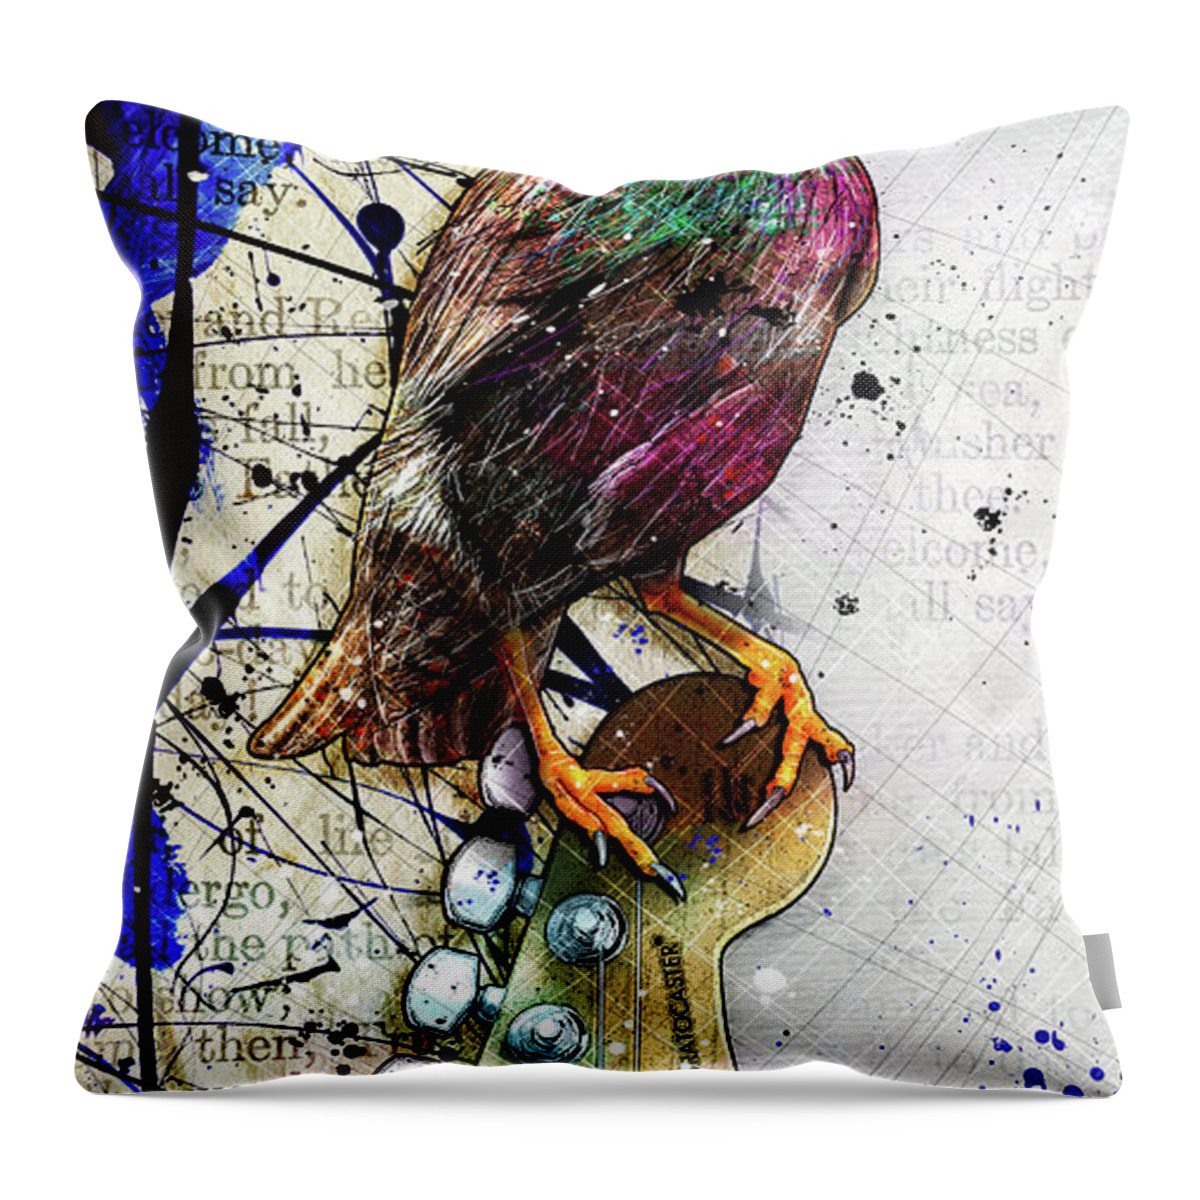 Starling Throw Pillow featuring the digital art Starling On A Strat by Gary Bodnar